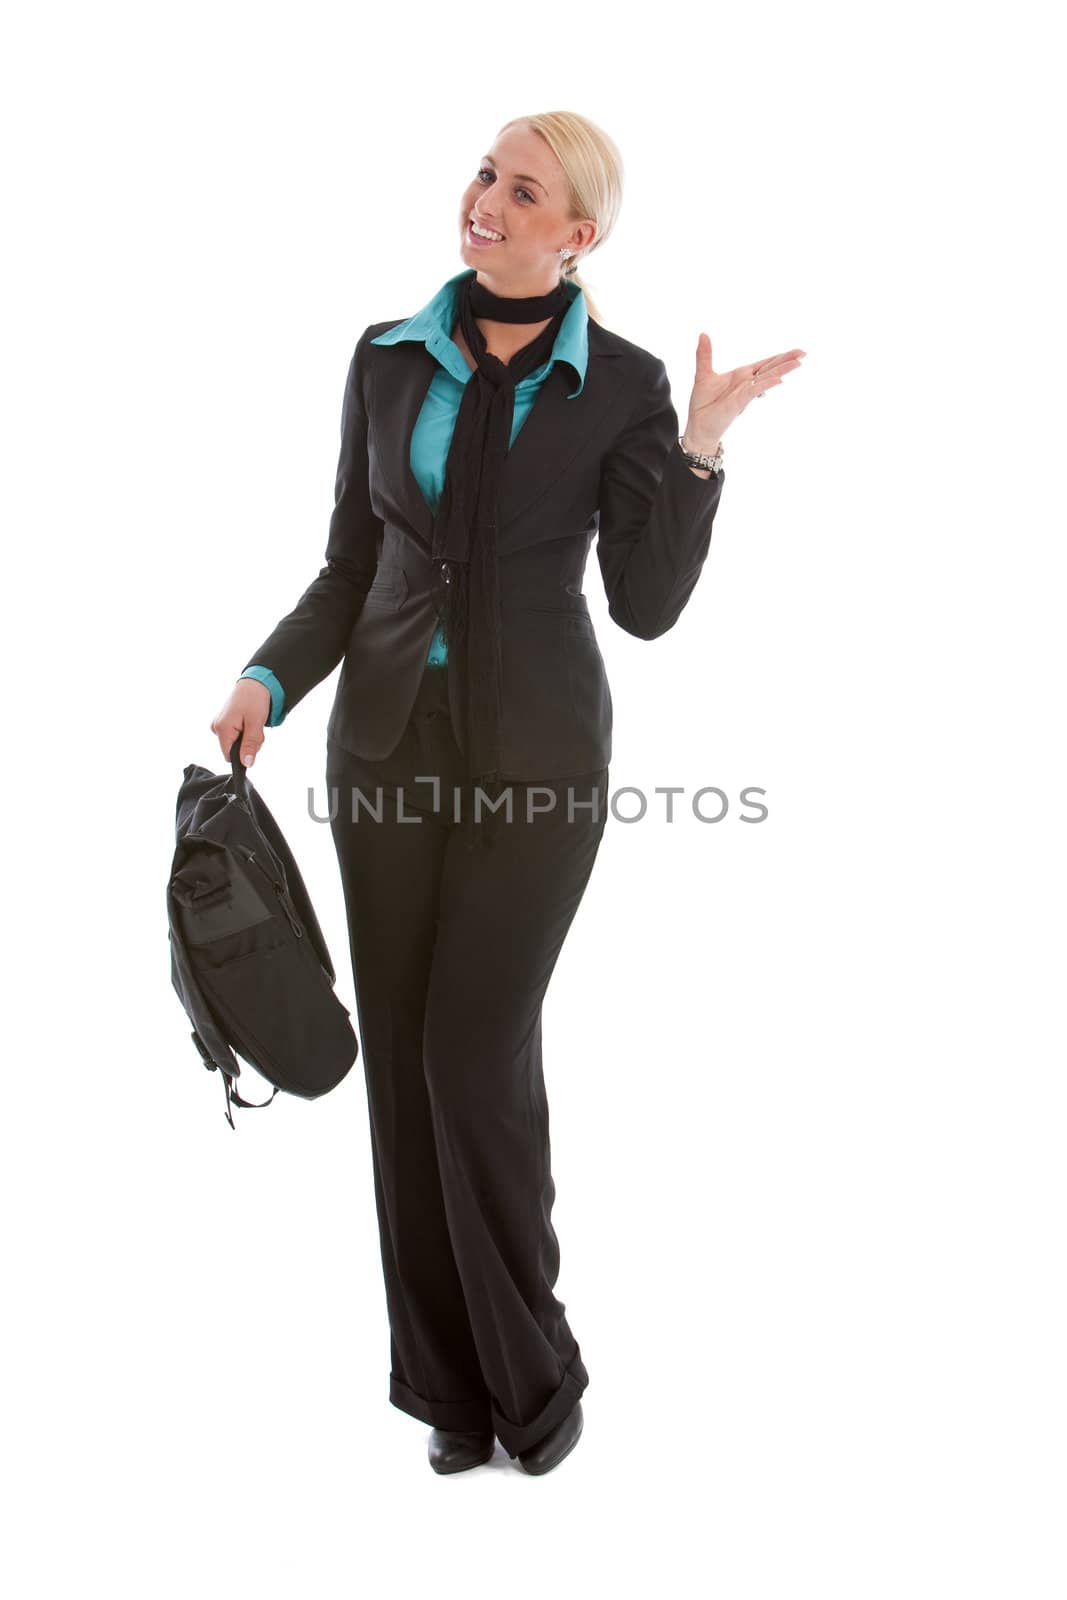 Pretty business woman looking very pleased on white background